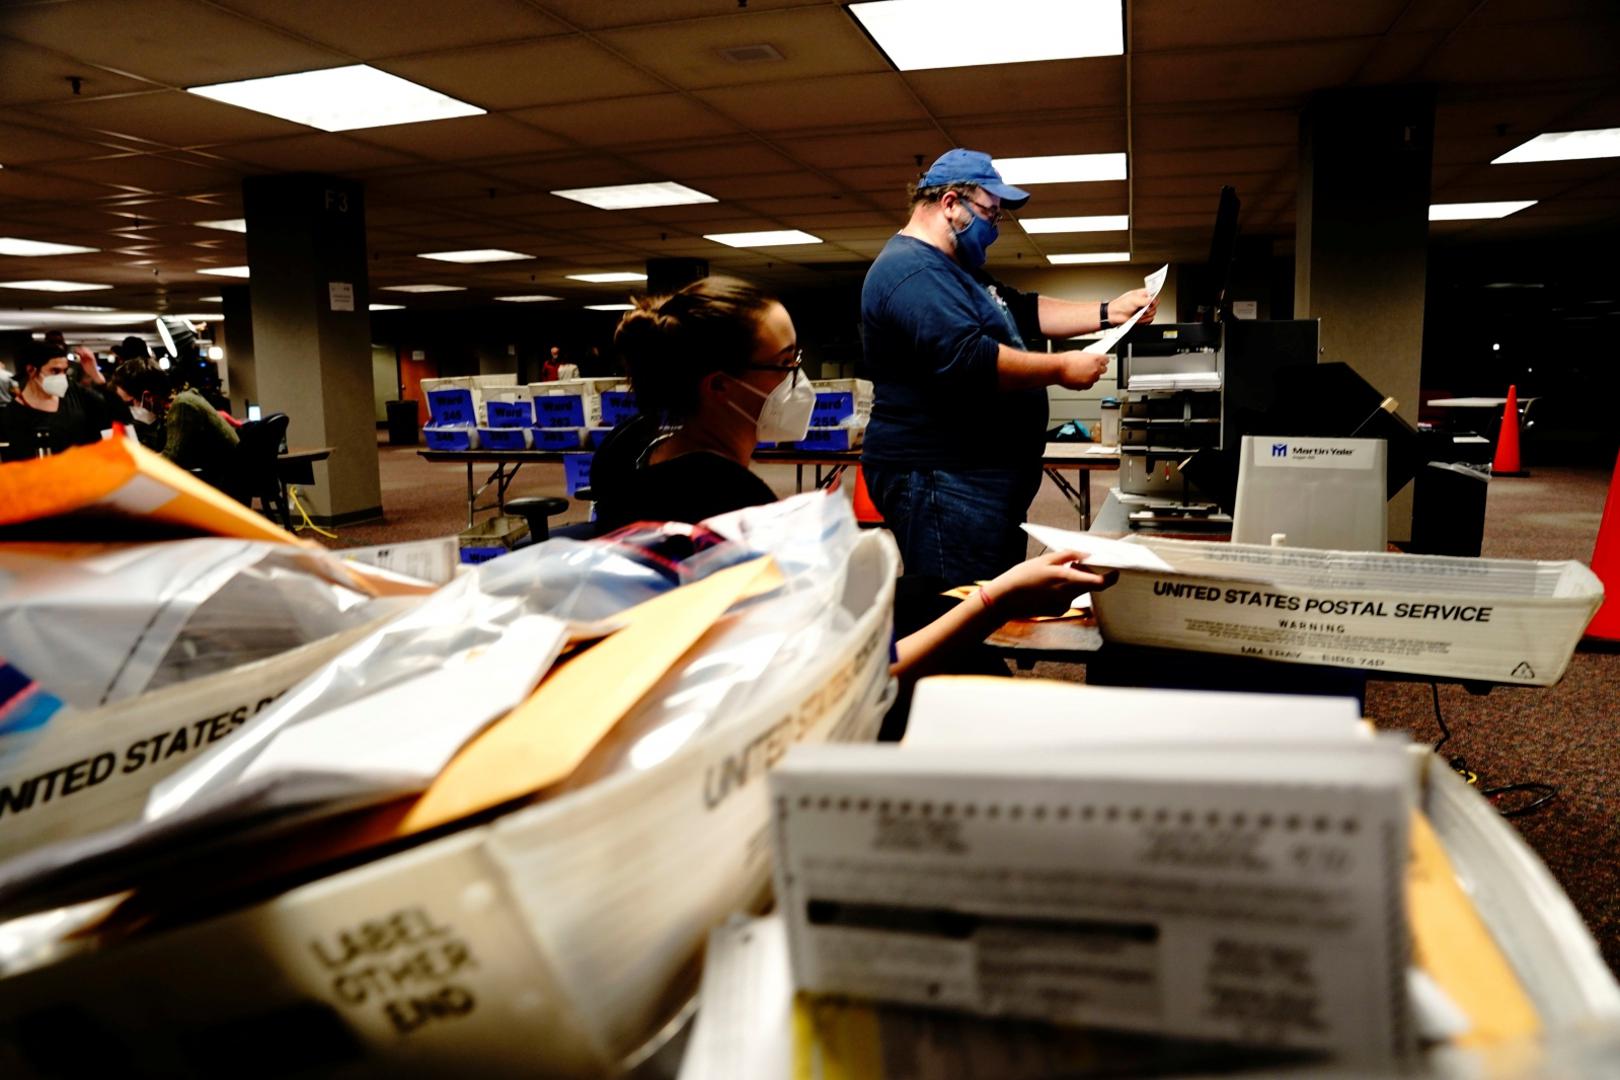 Counting absentee ballots at Milwaukee Central Count Poll workers Erin Keleske and Brett Rohlwing use a tabulator machine to process absentee ballots the night of Election Day at Milwaukee Central Count in Milwaukee, Wisconsin, U.S., November 3, 2020. REUTERS/Bing Guan BING GUAN